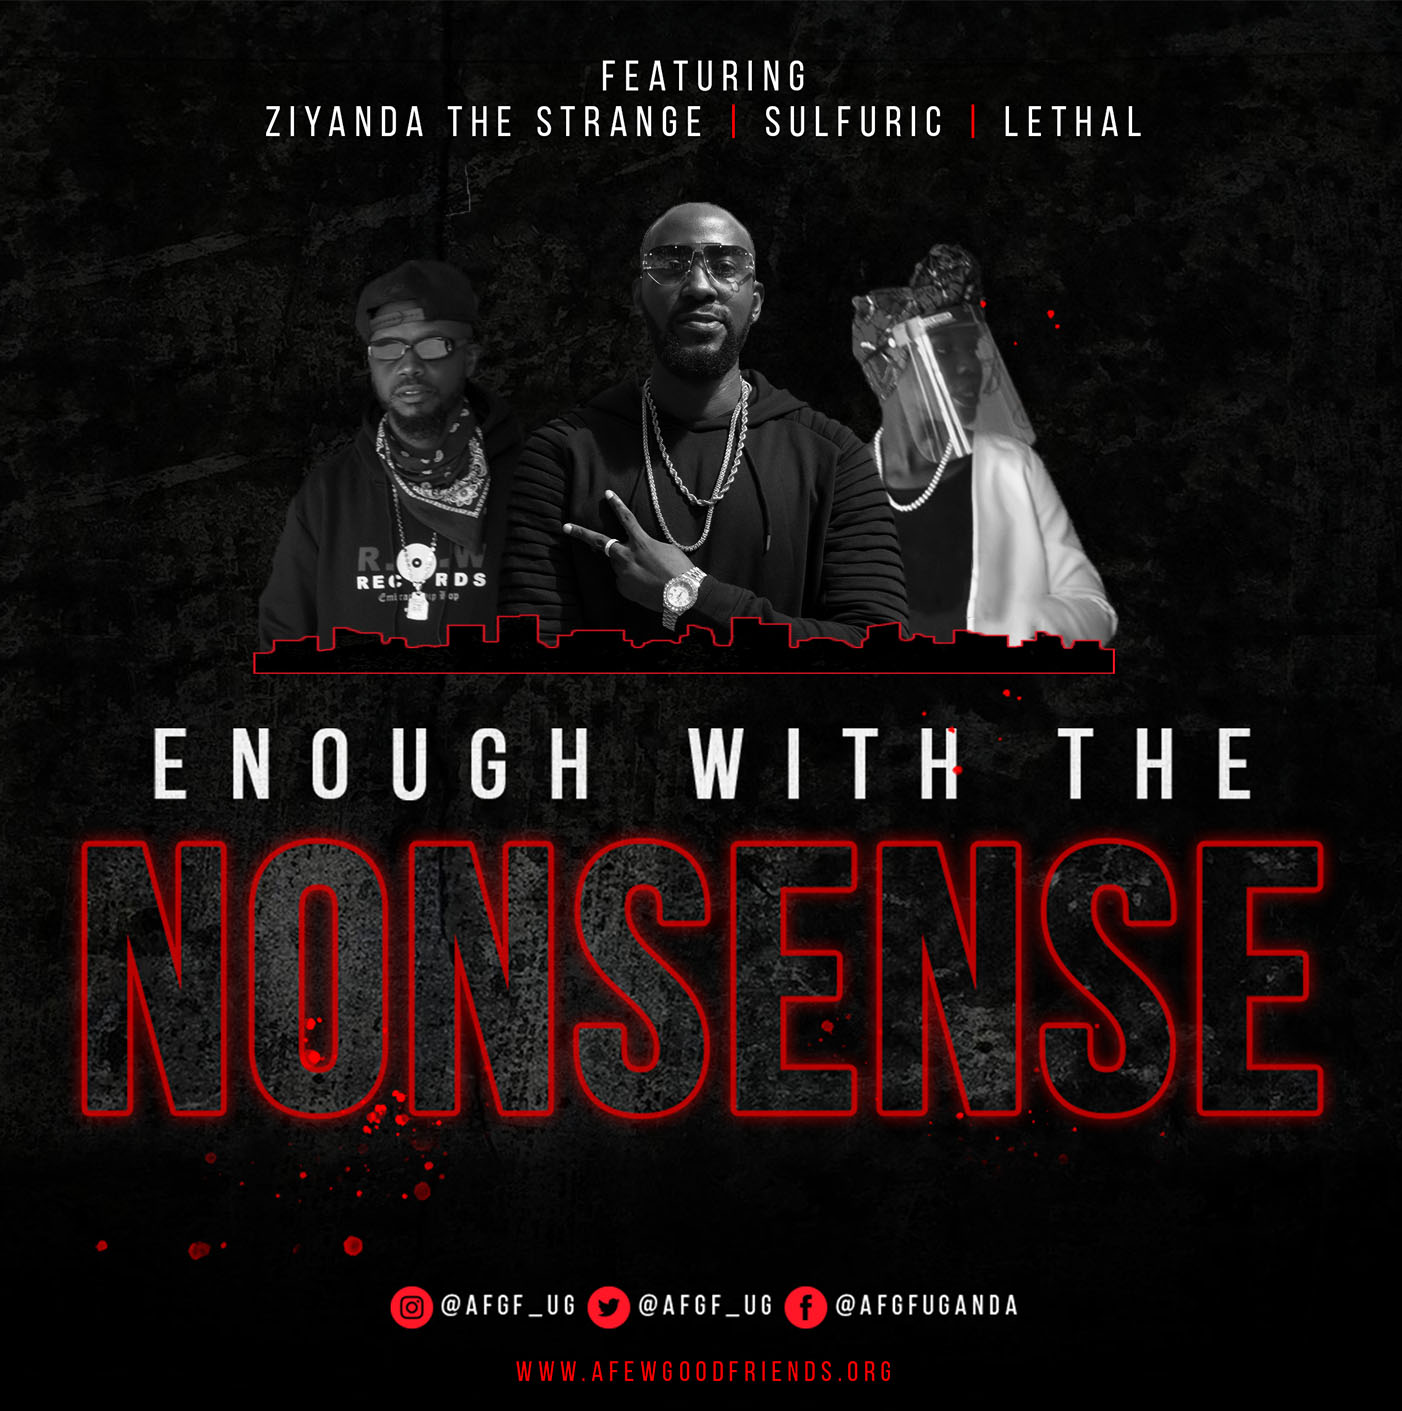 A Few Good Friends has released “Enough With The Nonsense” featuring Ziyanda the Strange, Sulfuric and Lethal